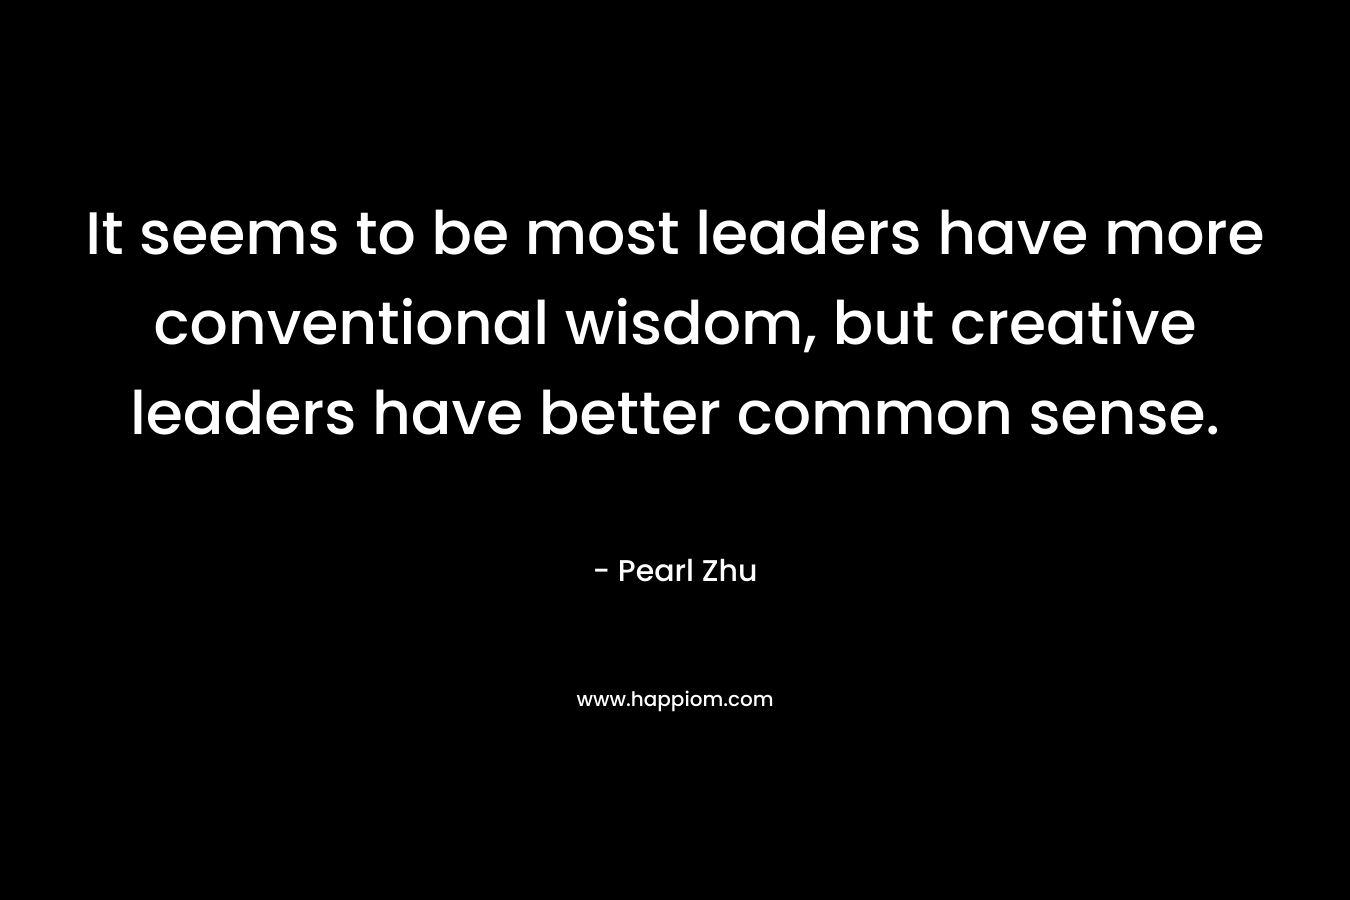 It seems to be most leaders have more conventional wisdom, but creative leaders have better common sense.